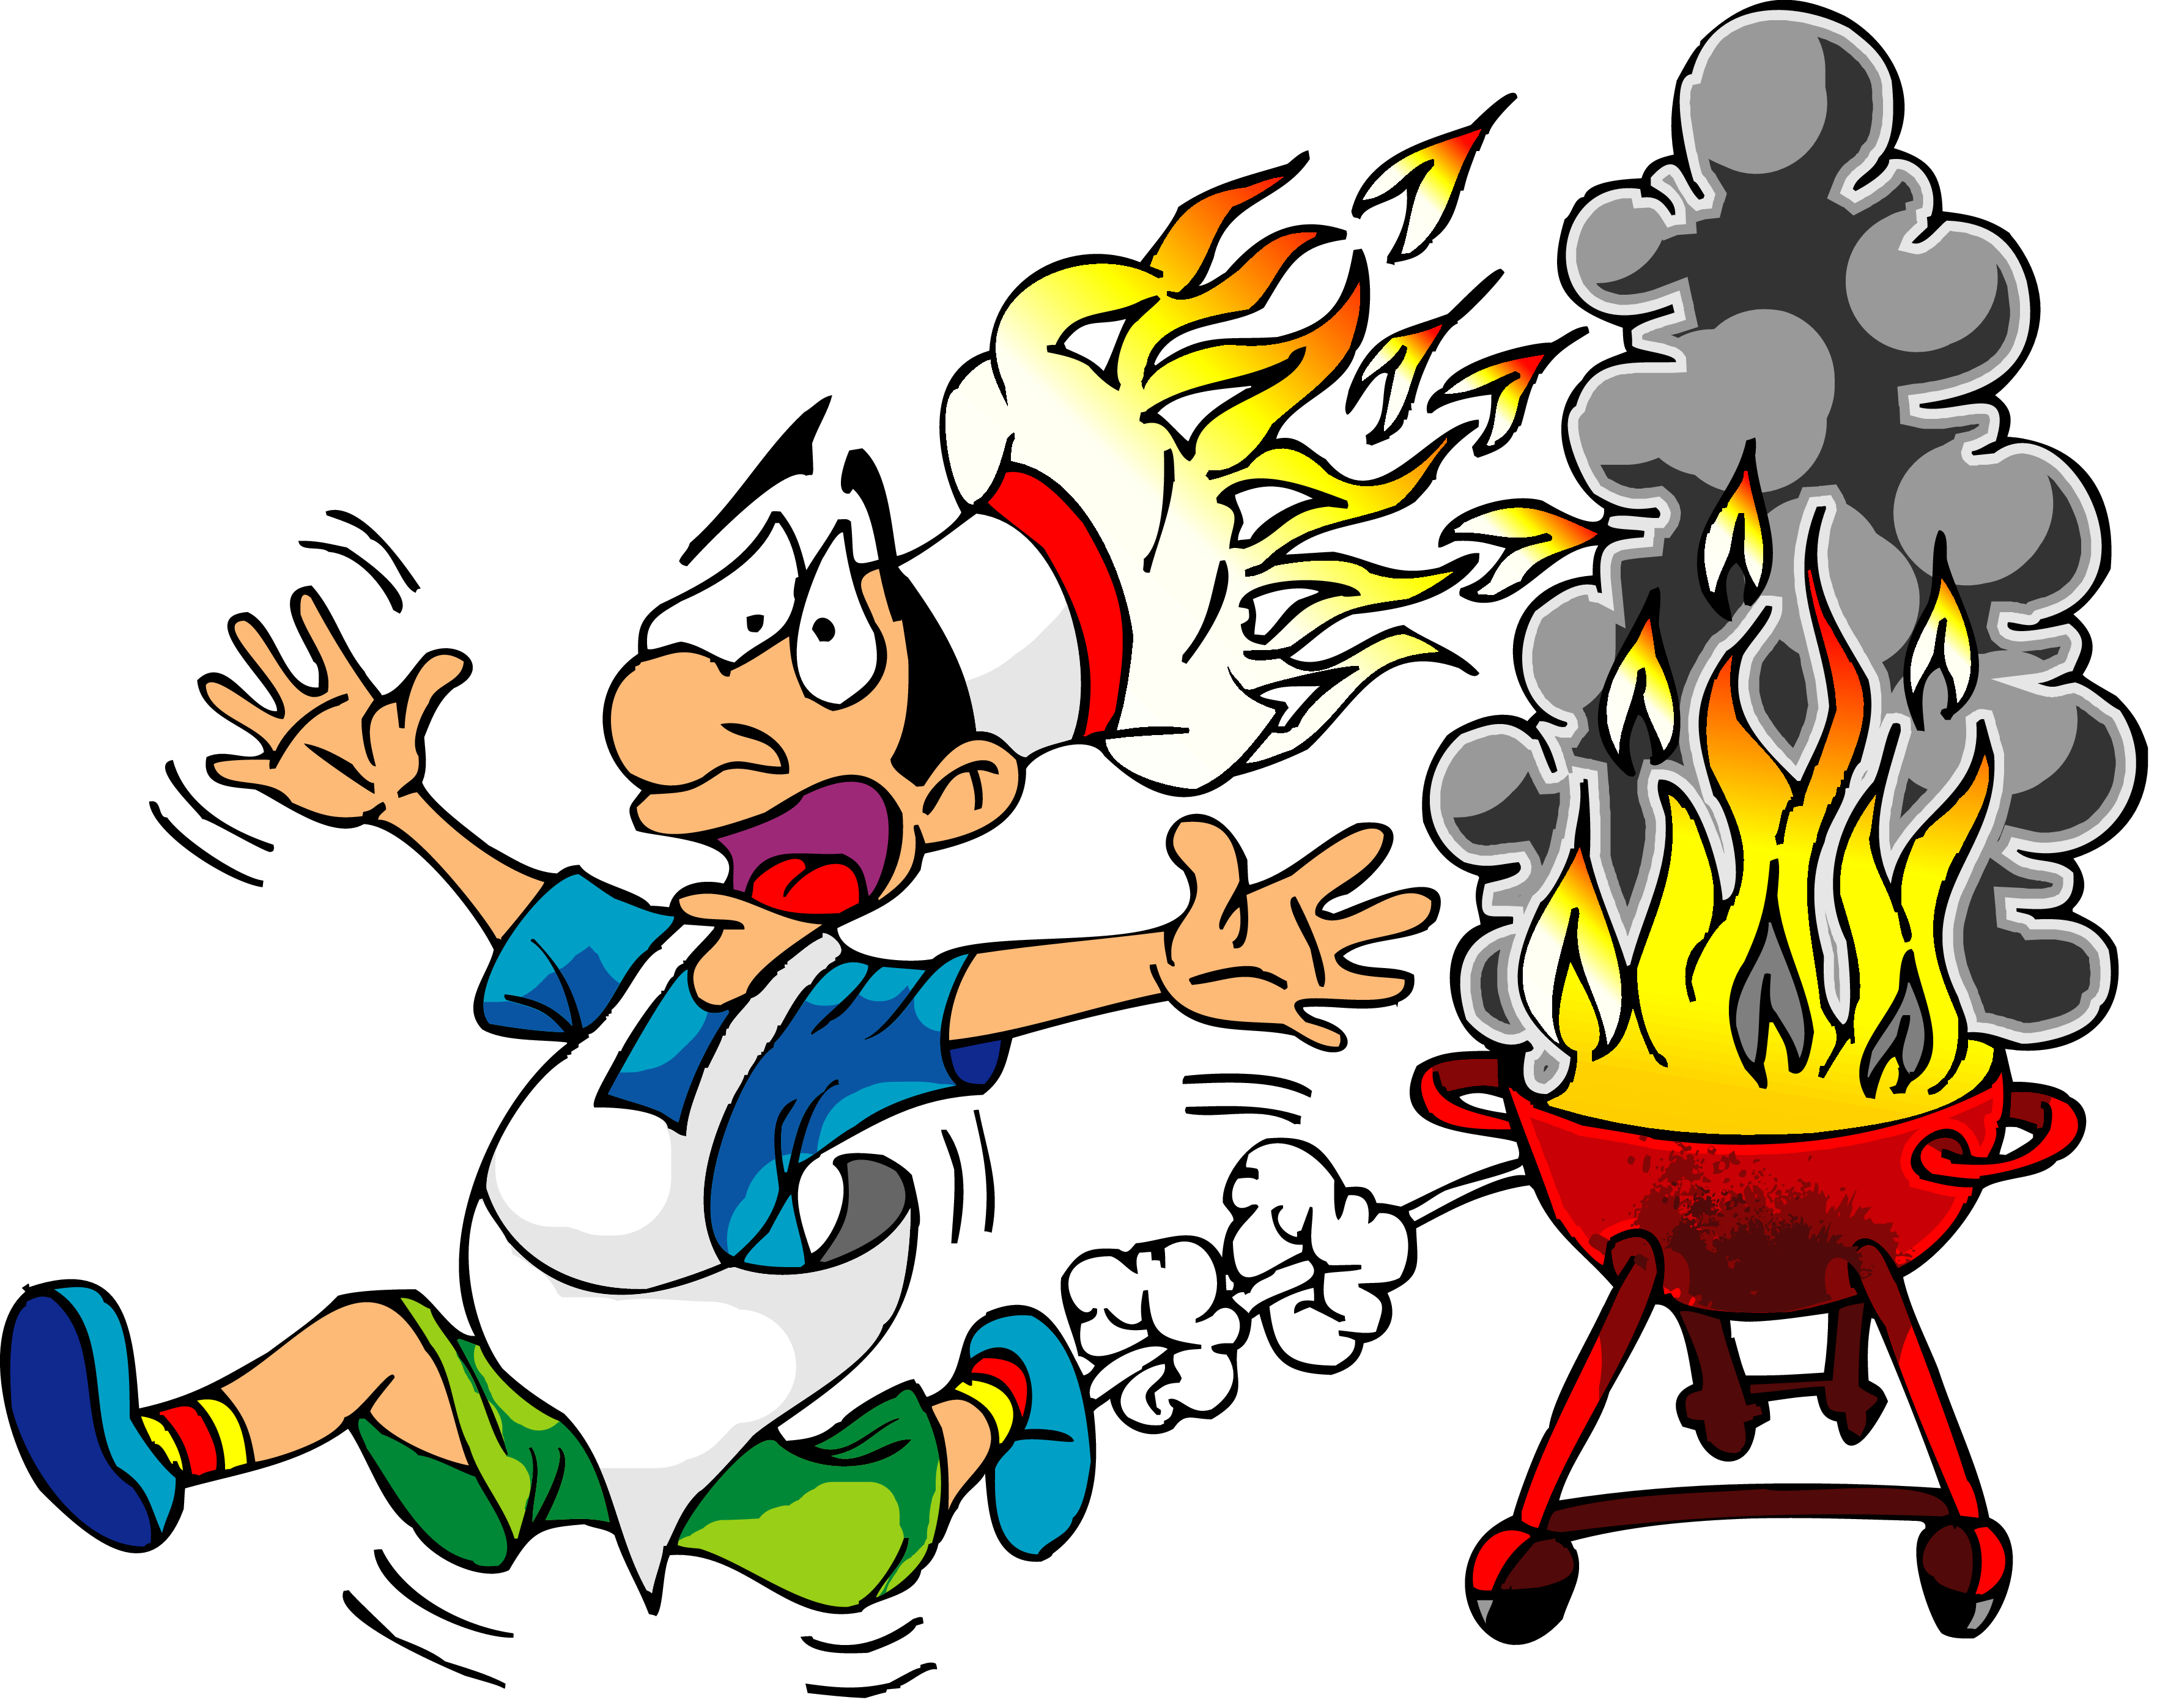 Free bbq page for. Conclusion clipart animated